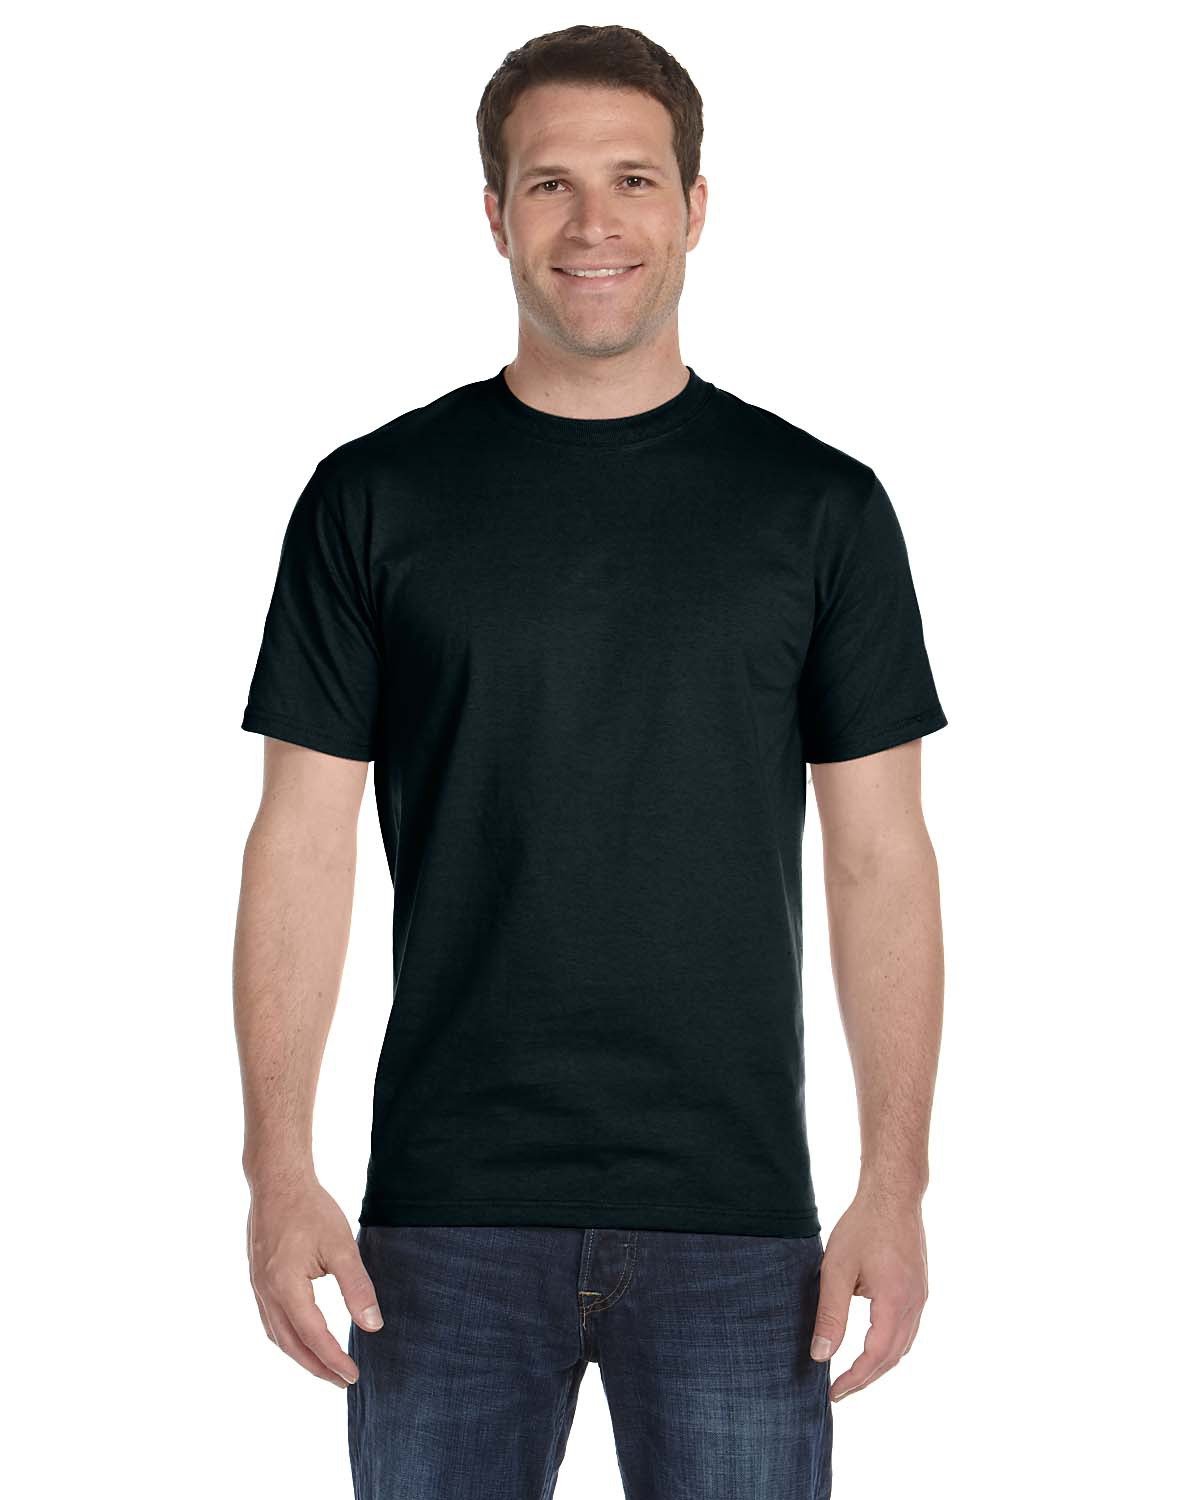 Size Chart for Hanes 5280 Mens ComfortSoft Cotton T-Shirt - A2ZClothing.com